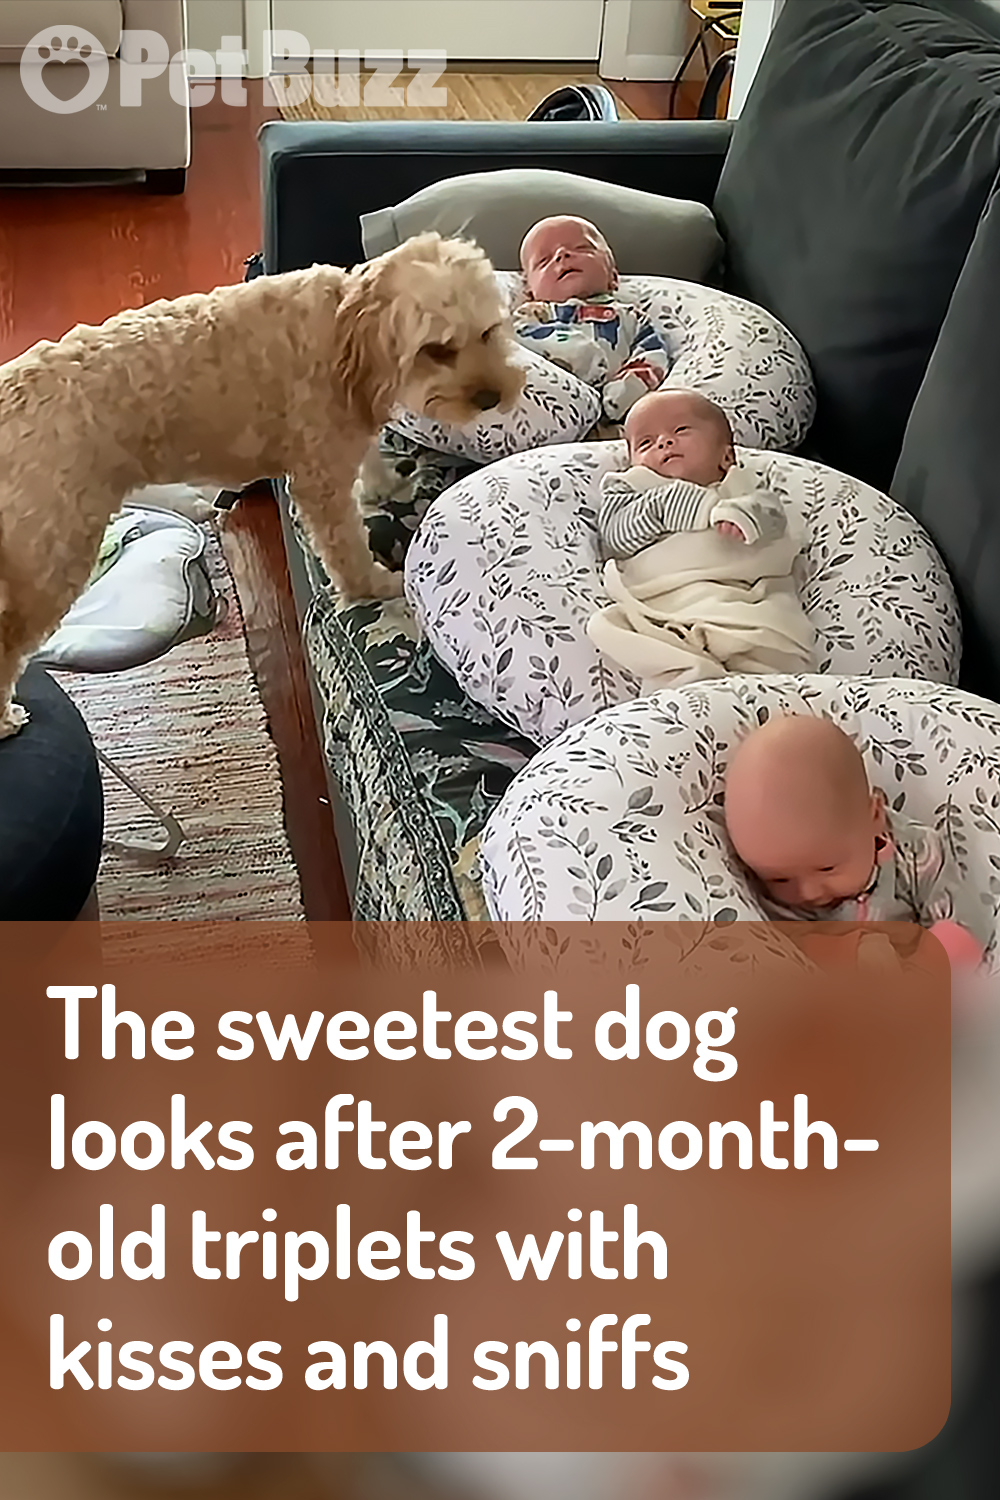 The sweetest dog looks after 2-month-old triplets with kisses and sniffs